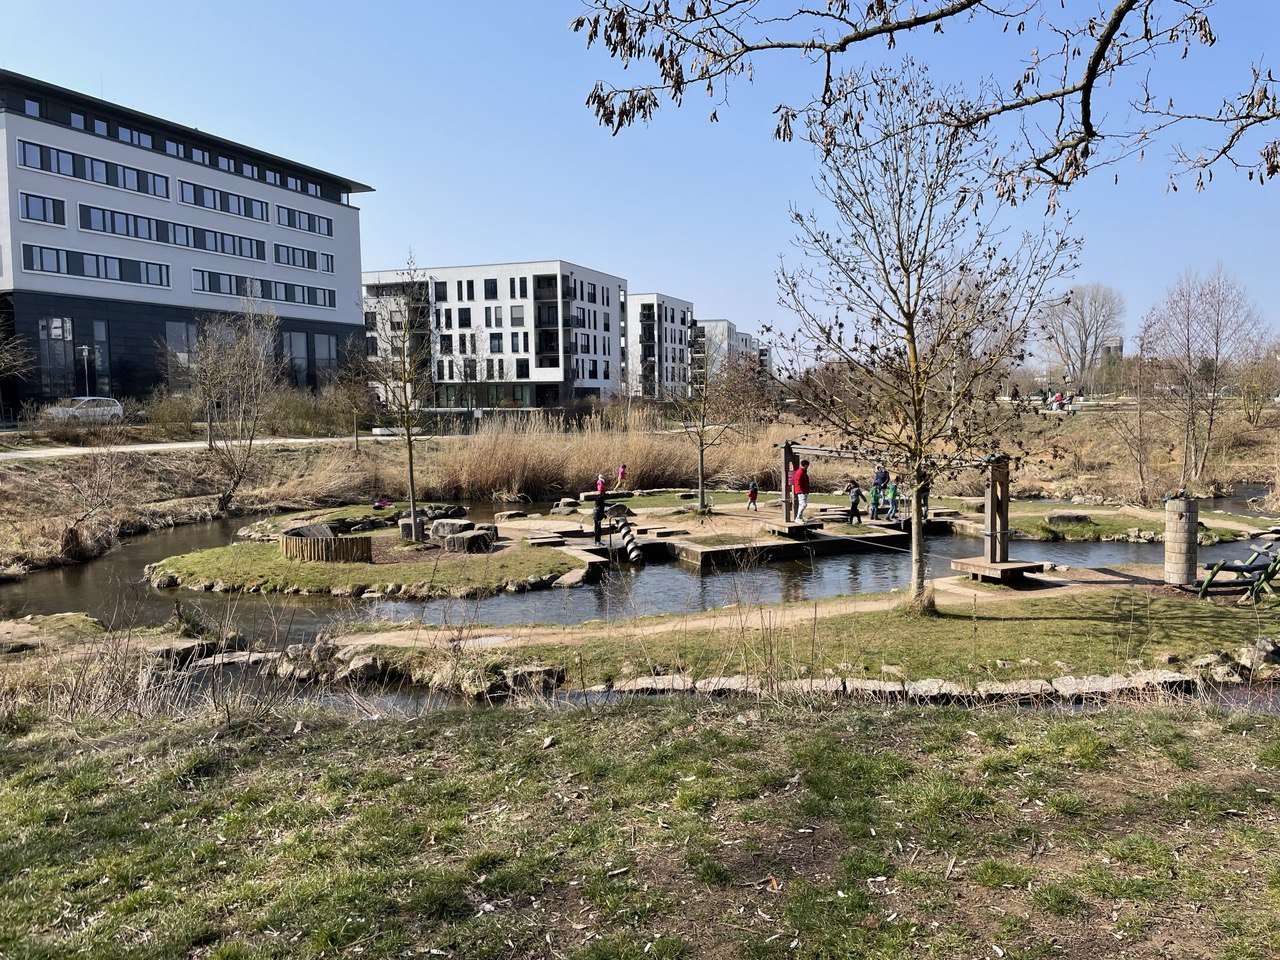 Picture of the ERBA WE5 building and the playground in the ERBA park